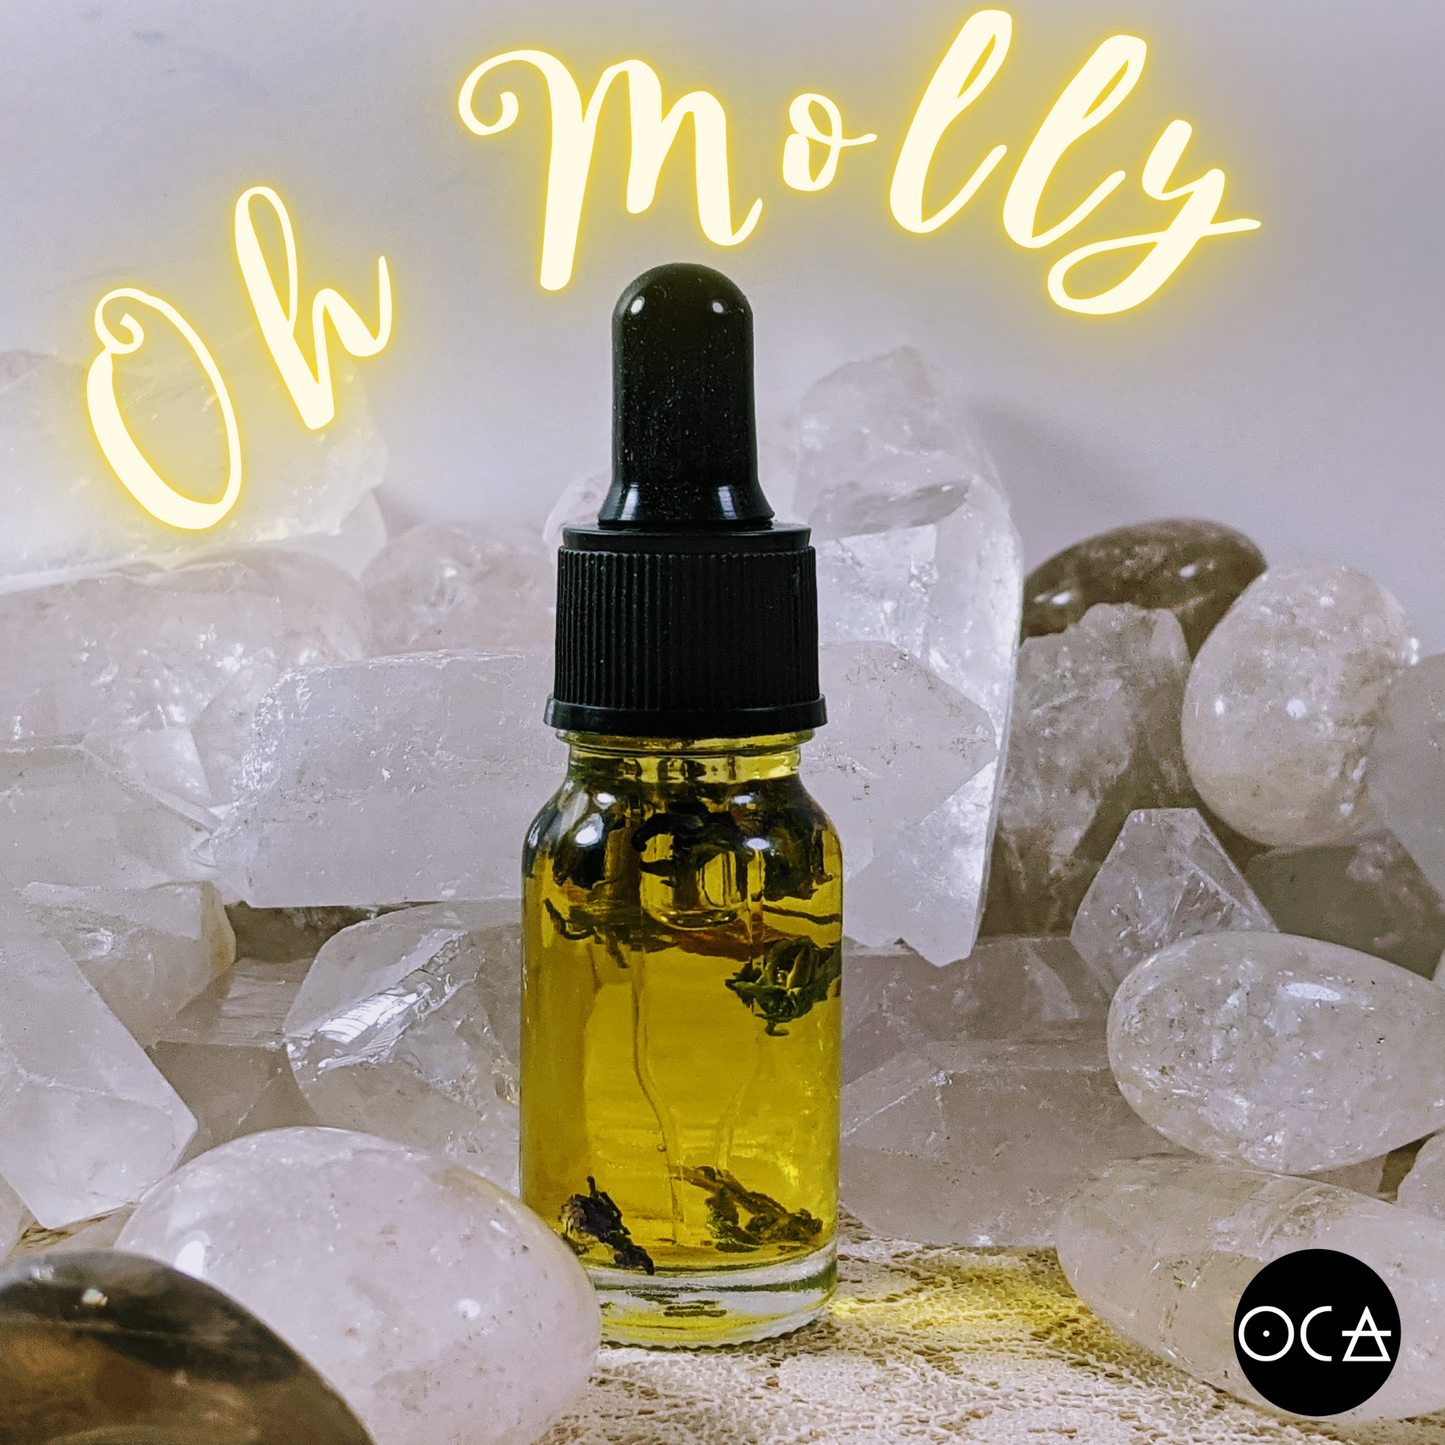 Oh Molly Oil/Perfume(Unisexy Blend)| A tribute to Molly Drake (Songbook Series)